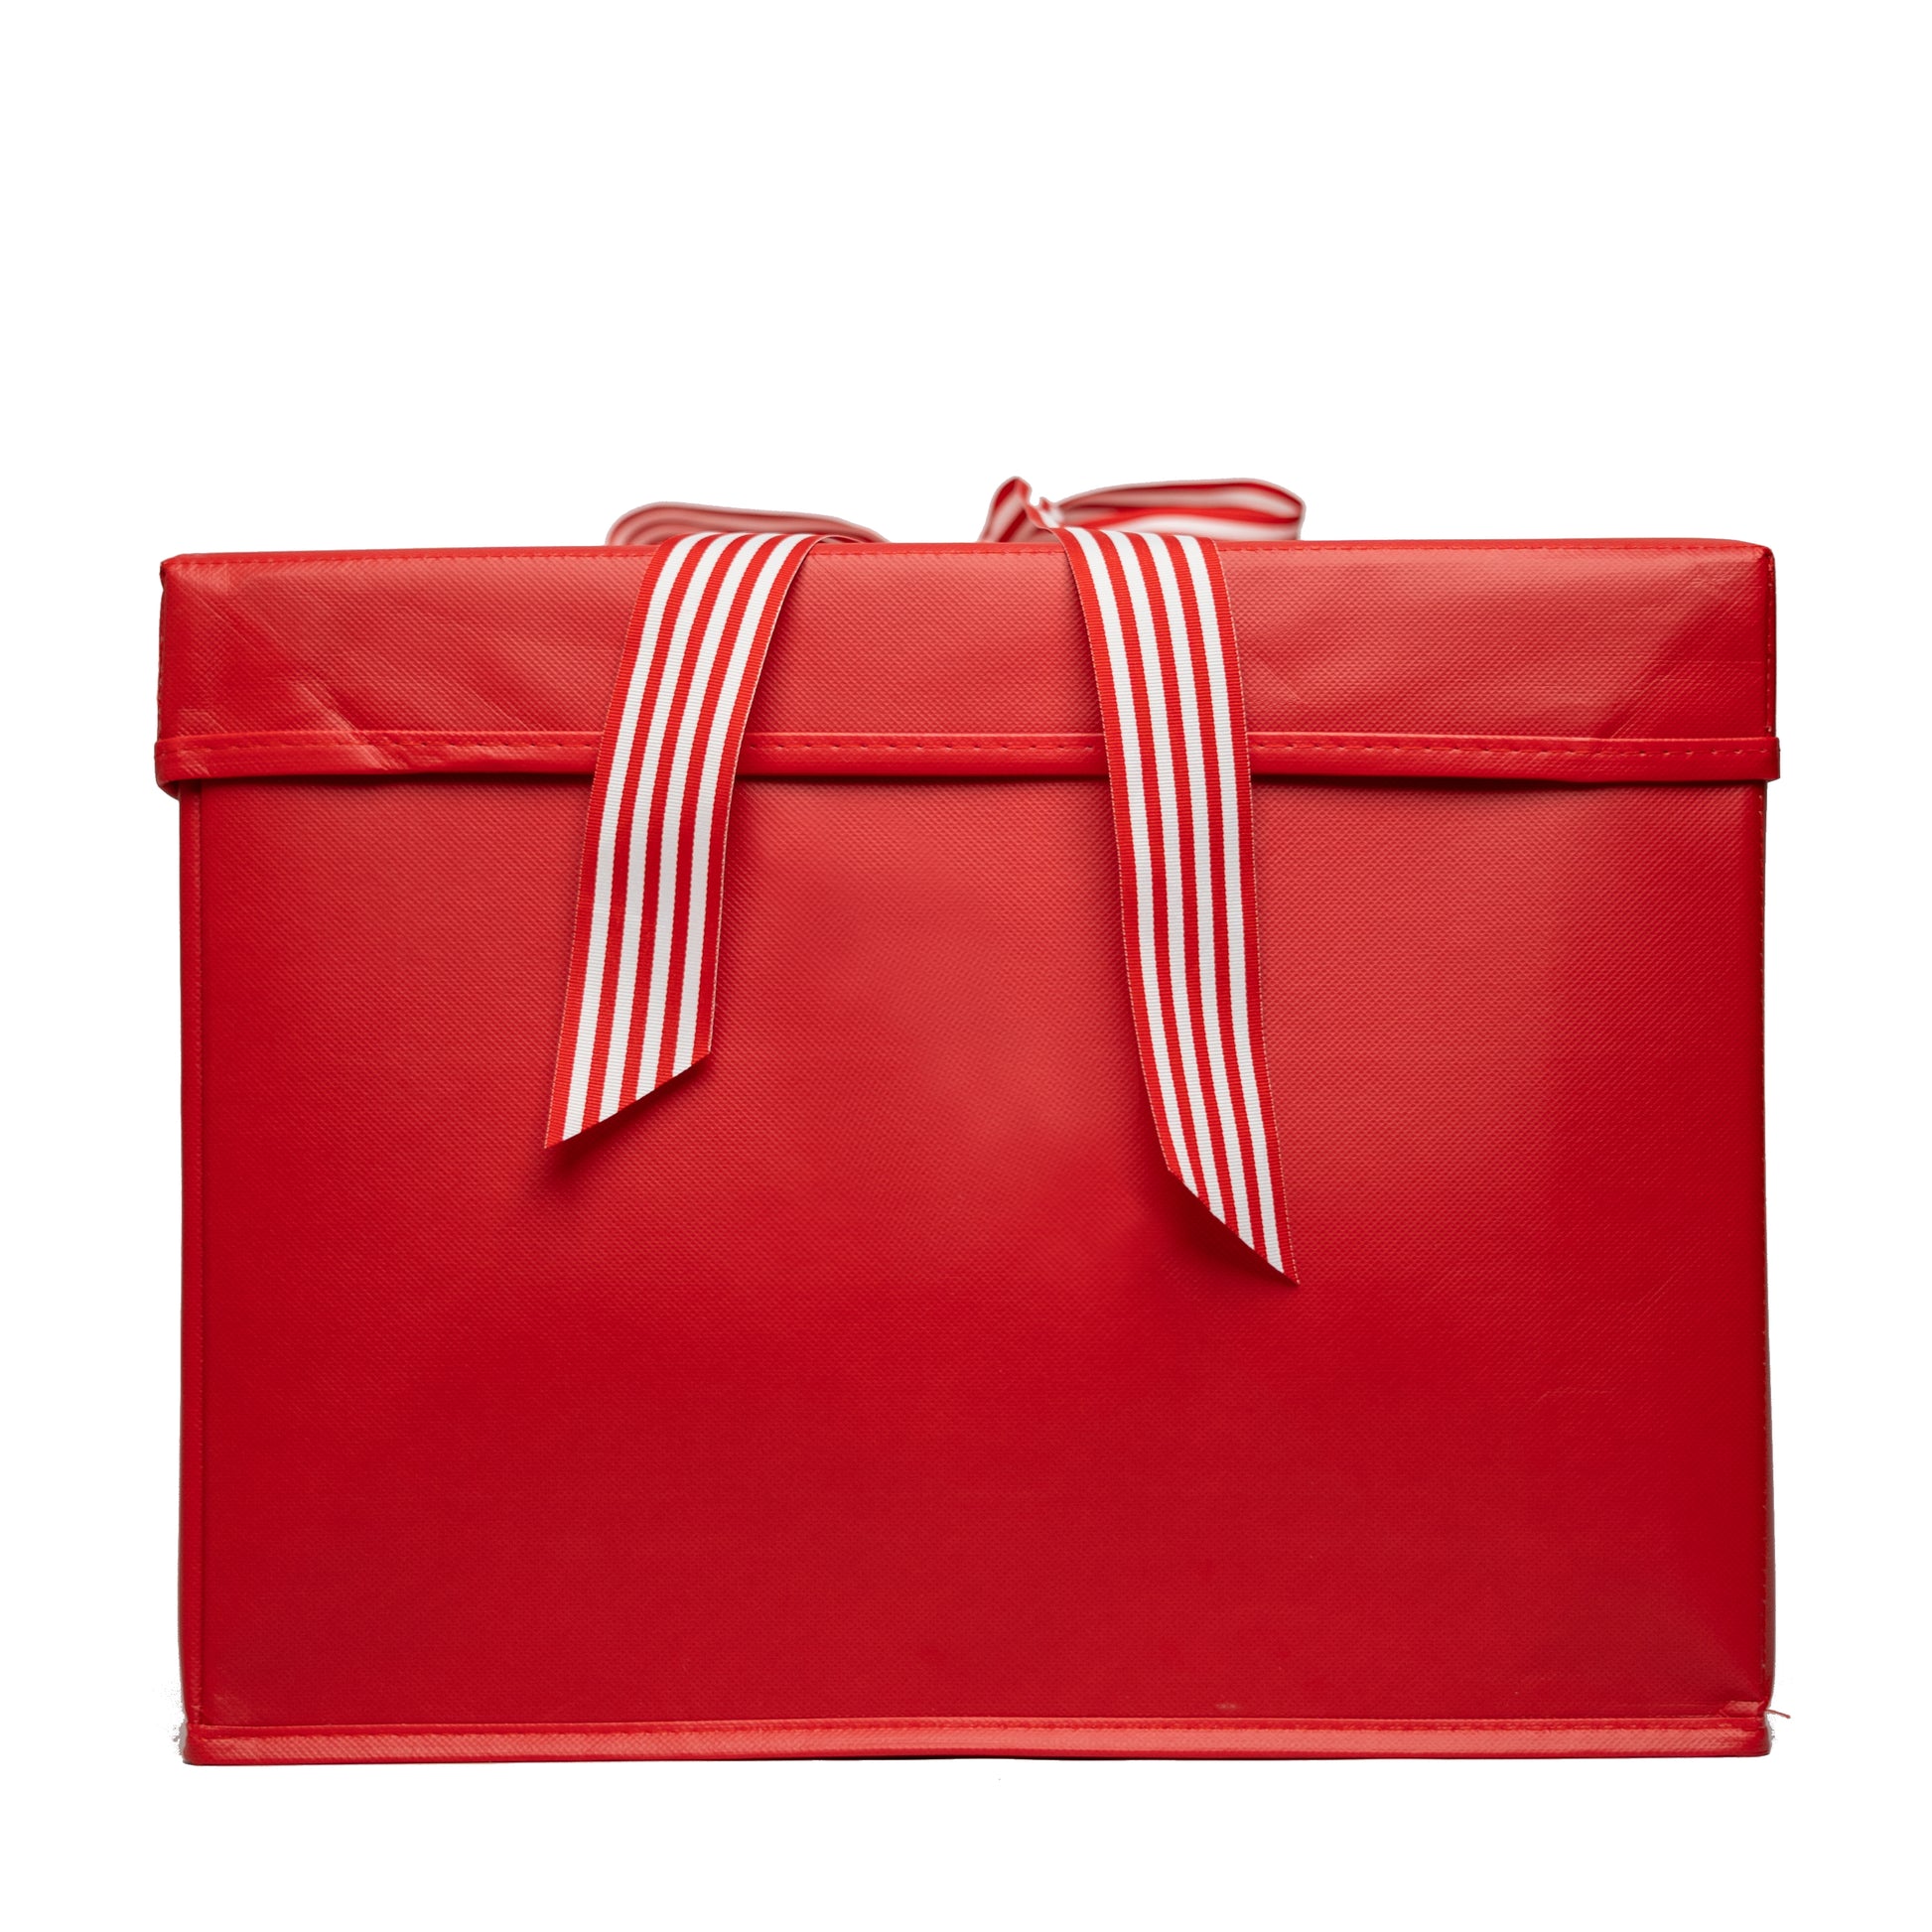 Large Red Heavy-Duty Extra Strong Collapsible Gift Box with ribbon attached, great zero waste solution for sustainable and eco-friendly gift boxes - EverWrap